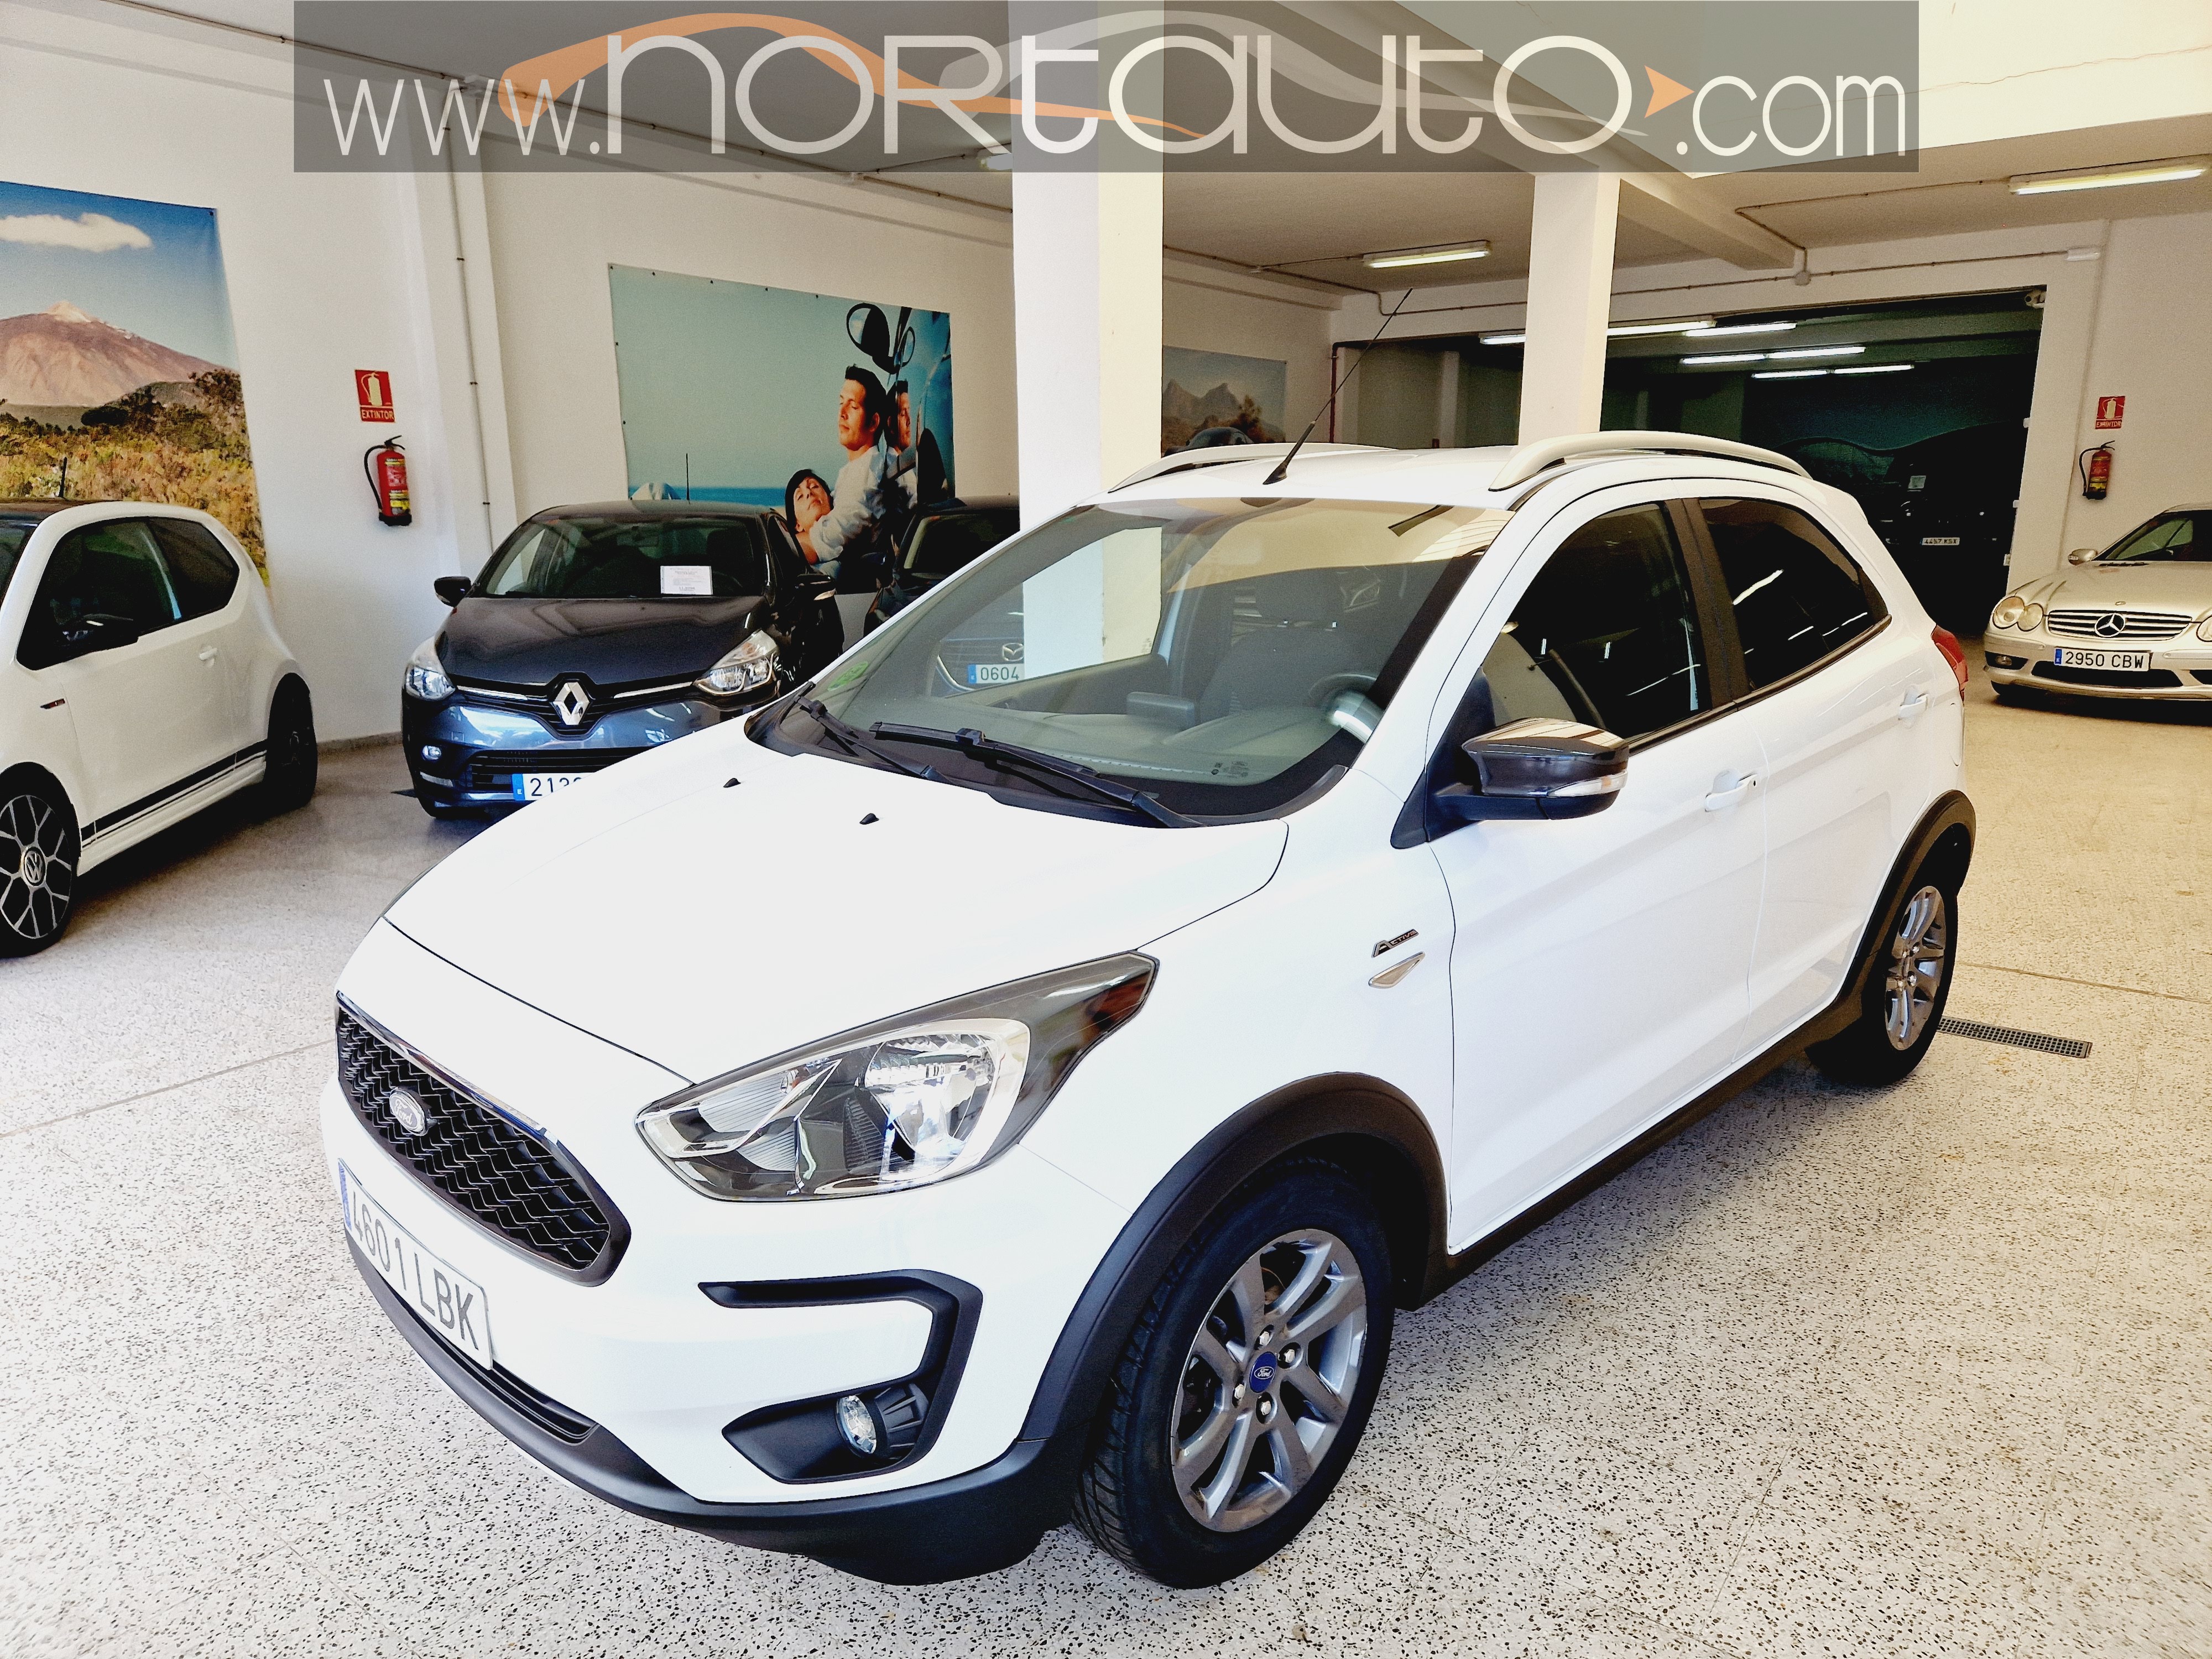 FORD Ka+ 1.2 TiVCT 63kW Active